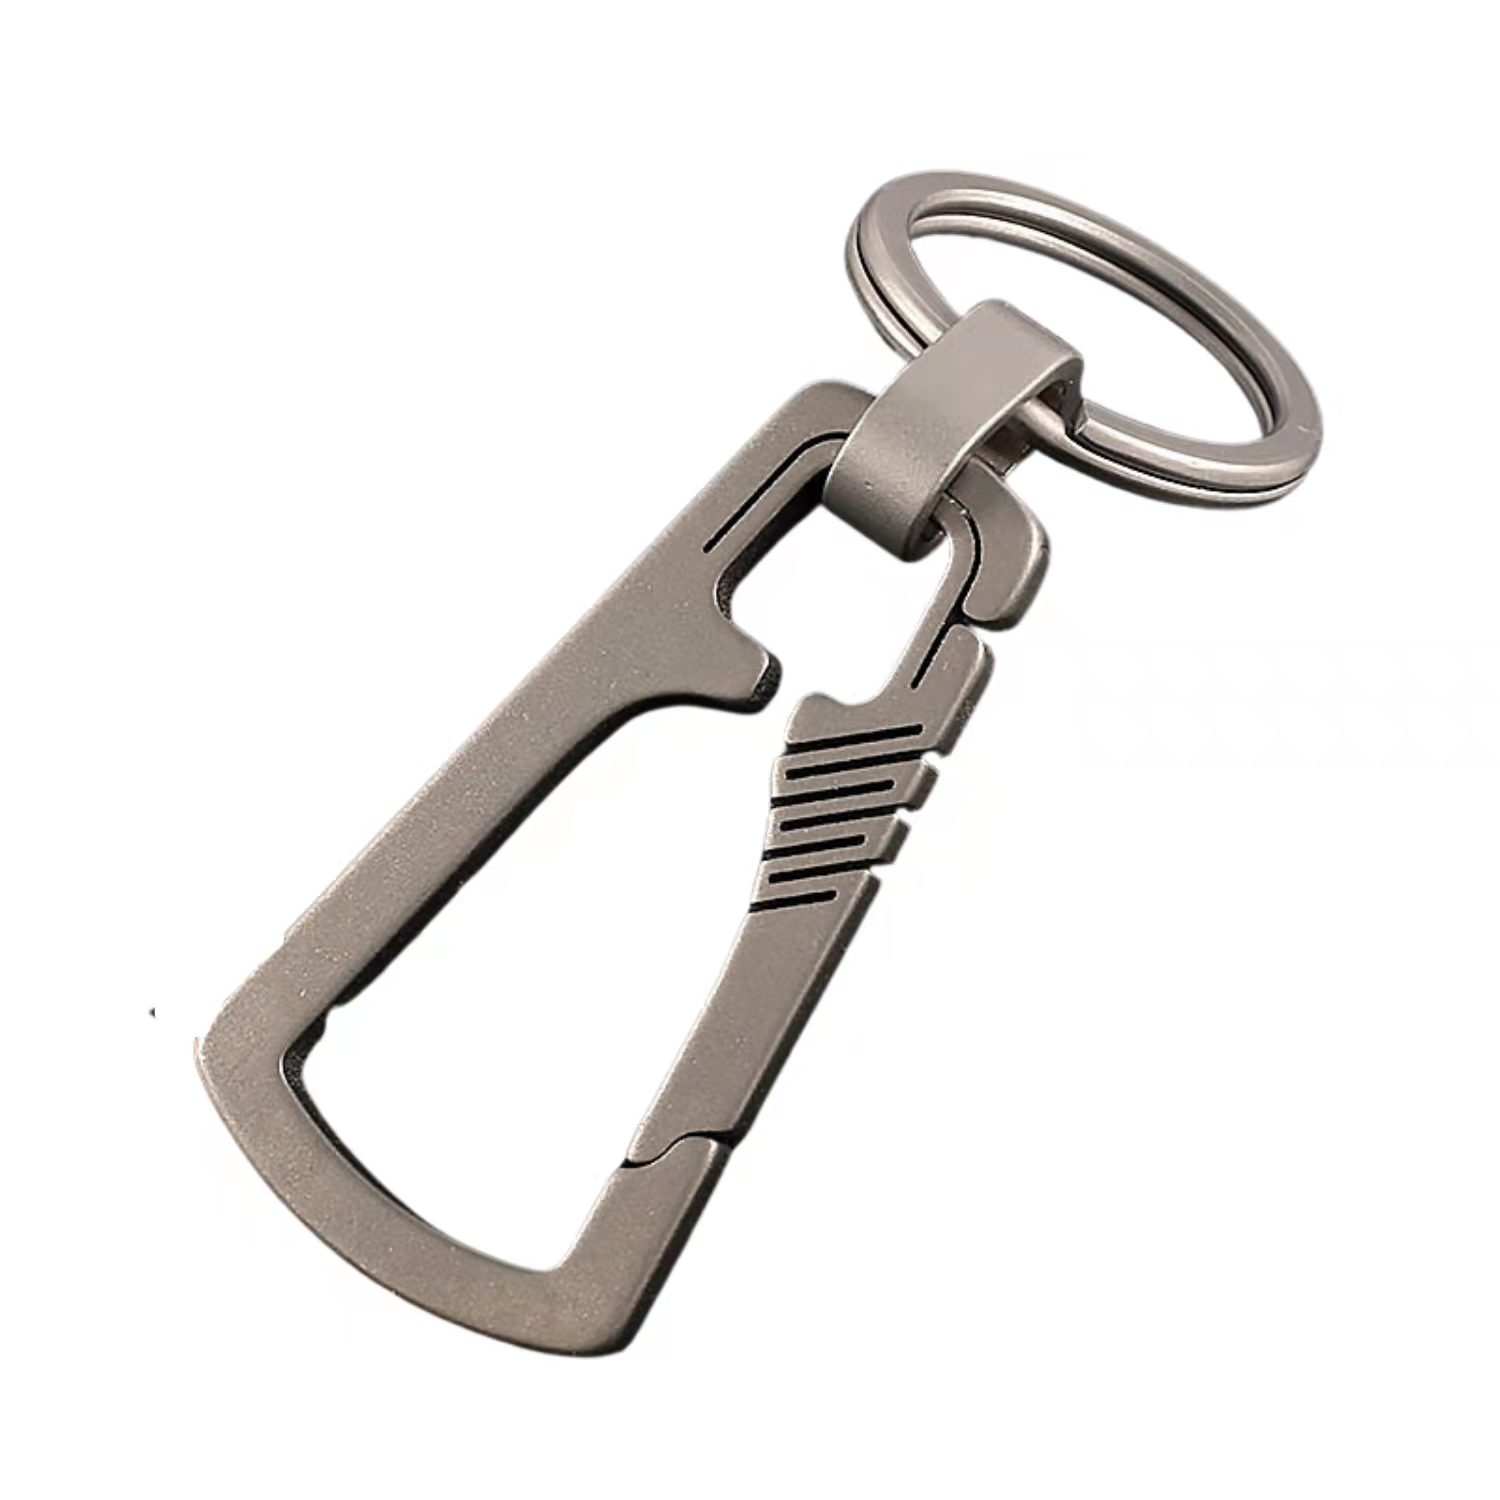 TISUR Titanium Carabiner Key Chains Fashionable Fitting Light 23131 fromJAPAN 